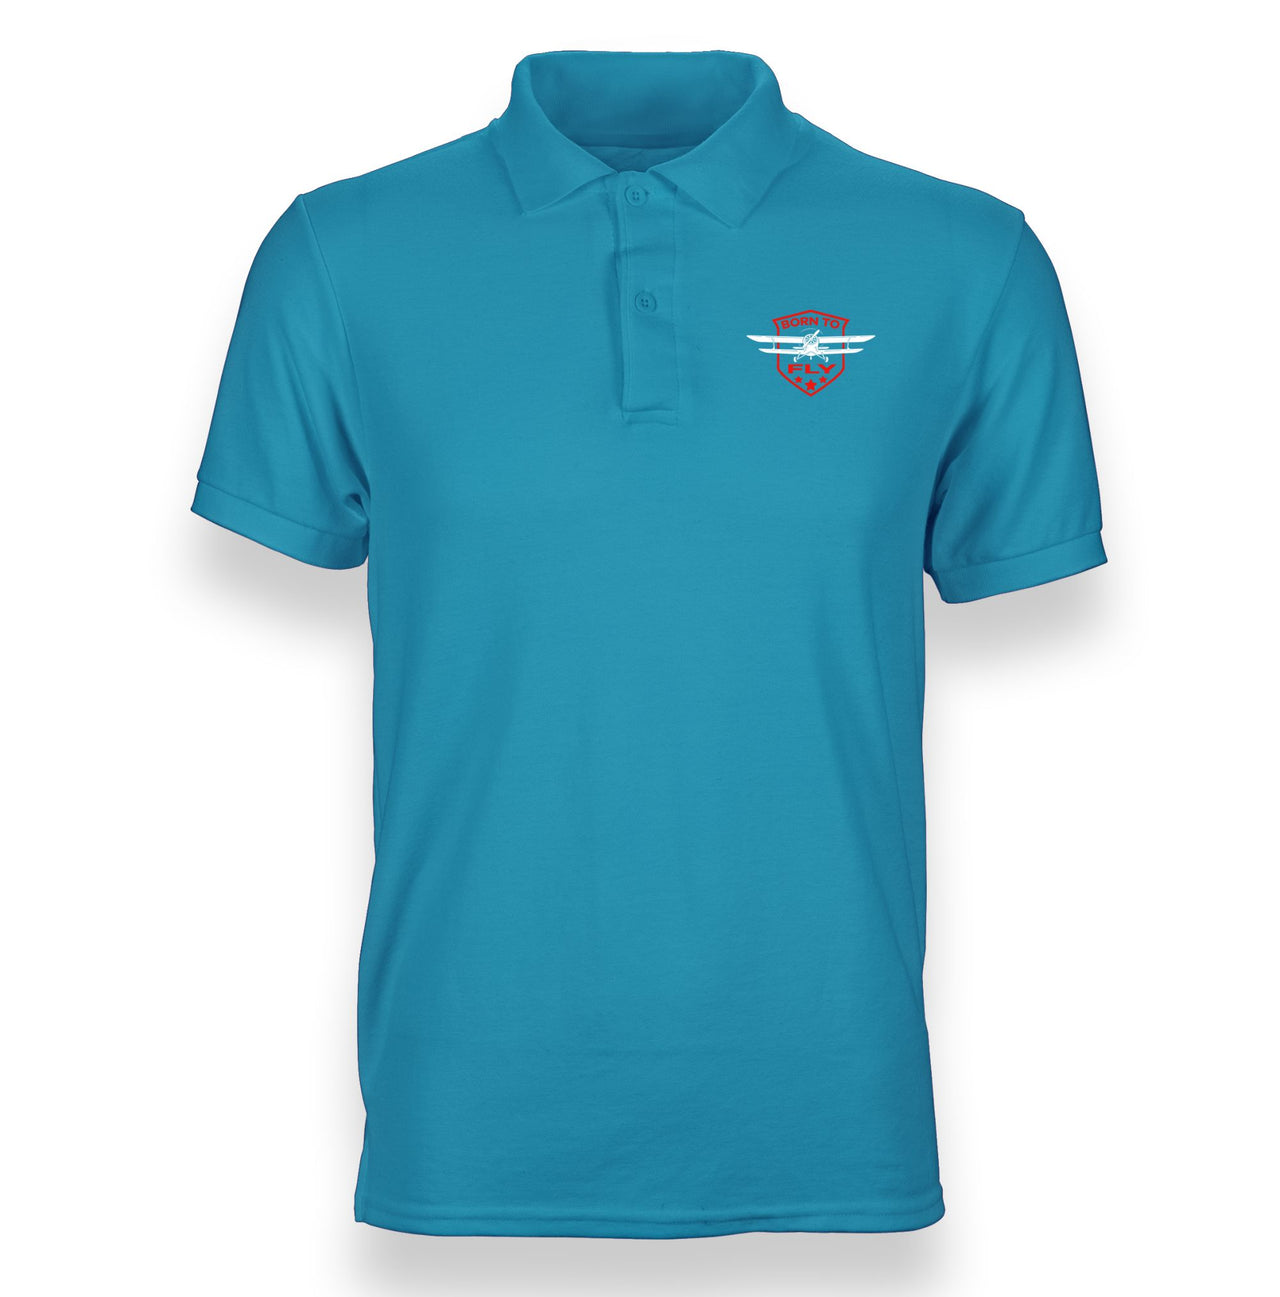 Born To Fly Designed Designed "WOMEN" Polo T-Shirts